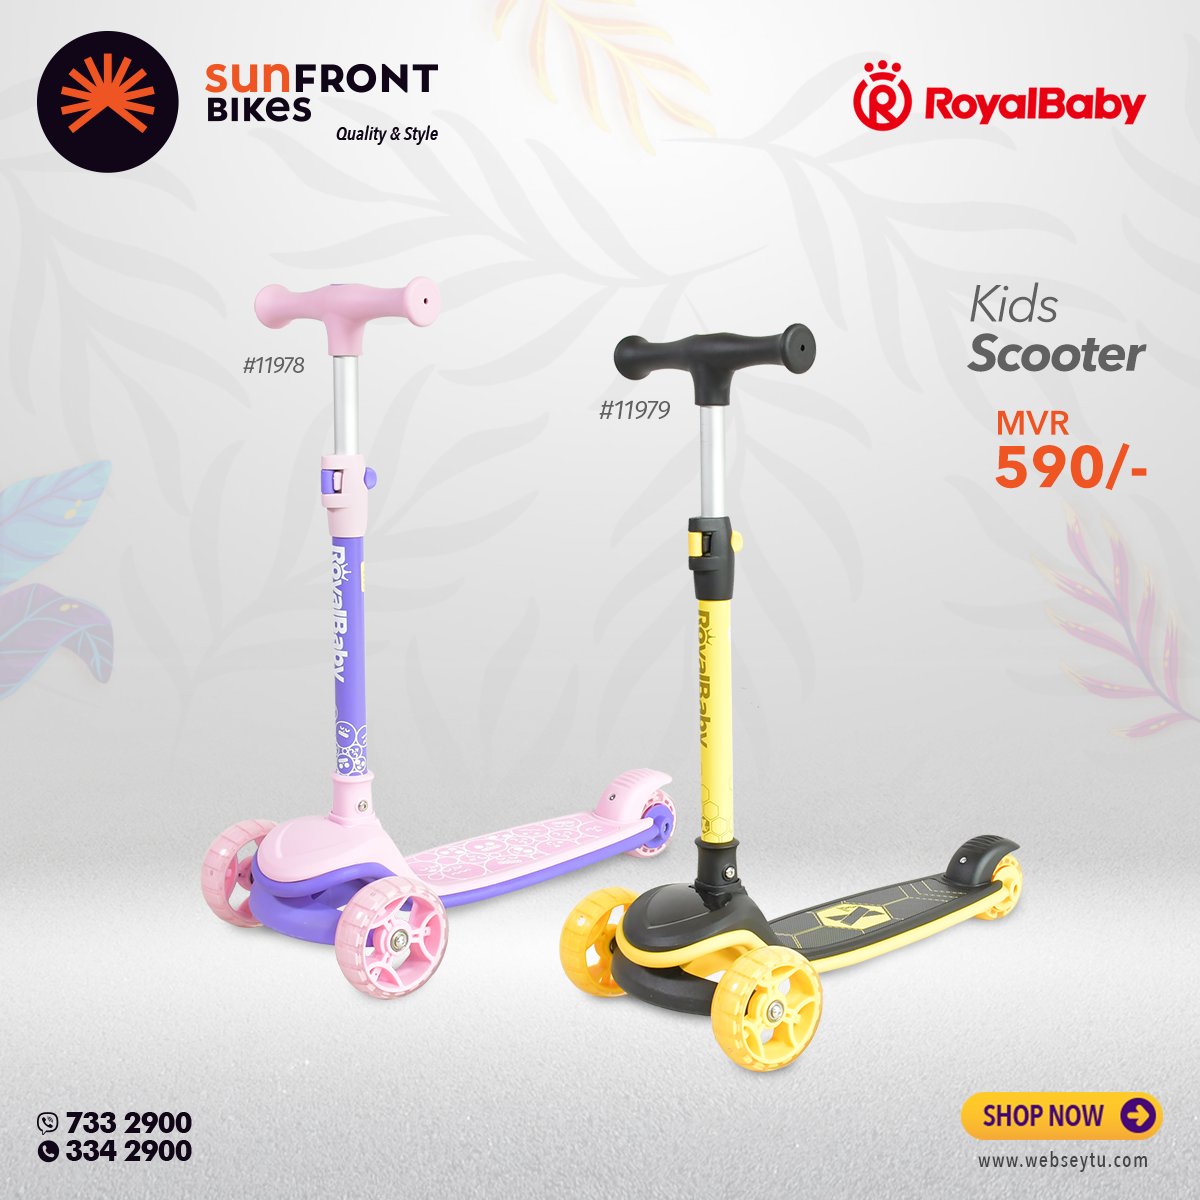 Perfect for little explorers, these wheels promise endless fun!

Buy Online: bit.ly/3ZQv8FQ

SunFront Bikes
Tel: 334 2900
Hotline: 733 2900

#balancebike #kidsbike #scooter #kids #bikes #maldivesbikes #maldives #sfbikeshop #sunfront #qualityandstyle #skateboard #rideon